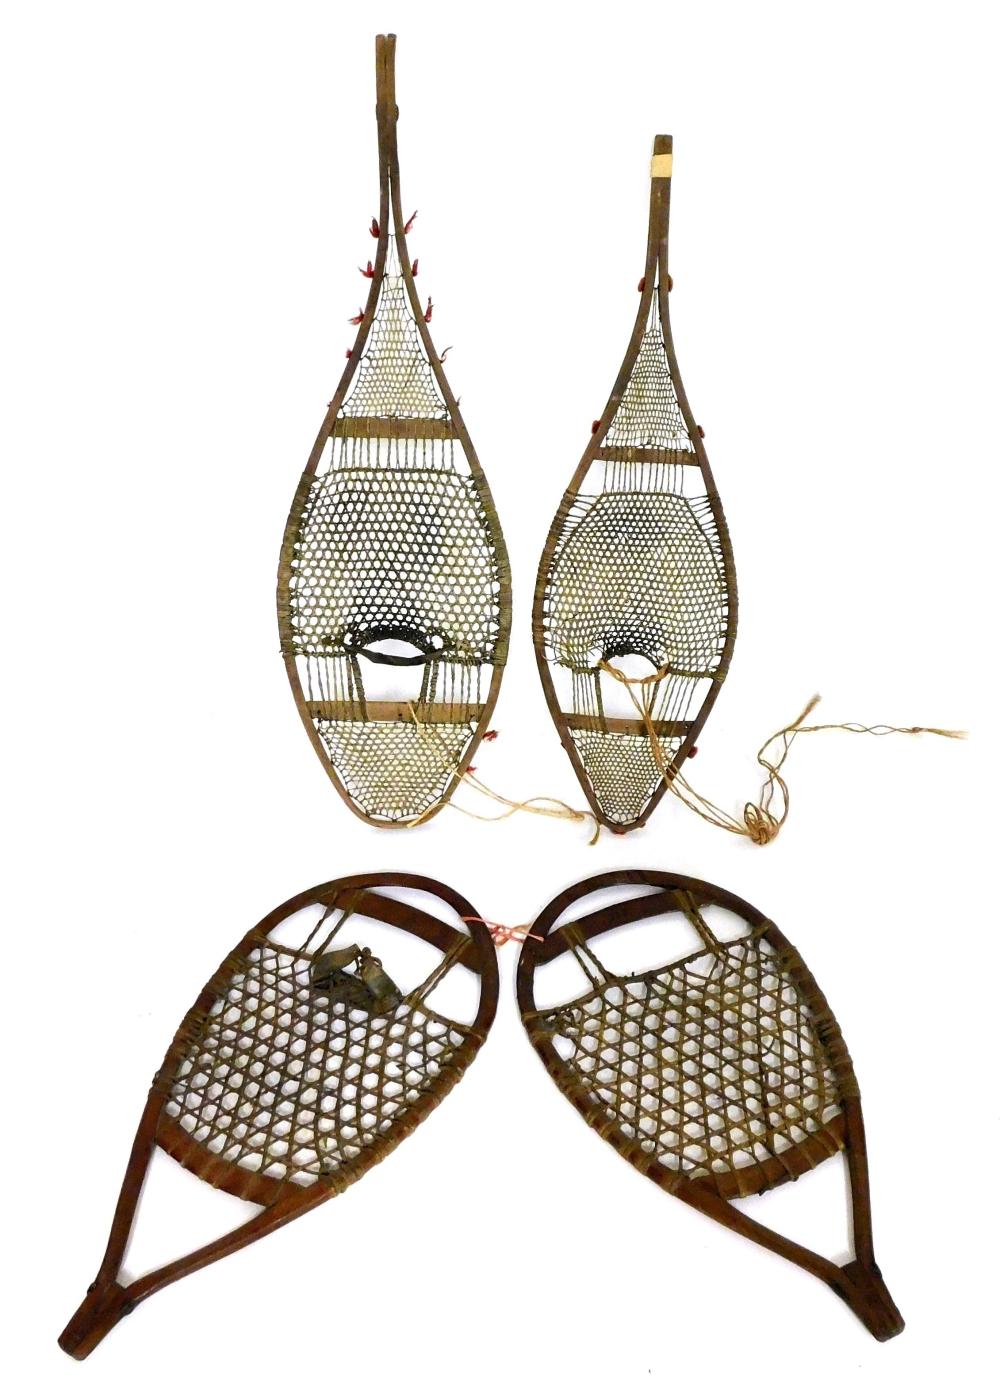 ANTIQUE SNOW SHOES, EARLY 20TH C., TWO